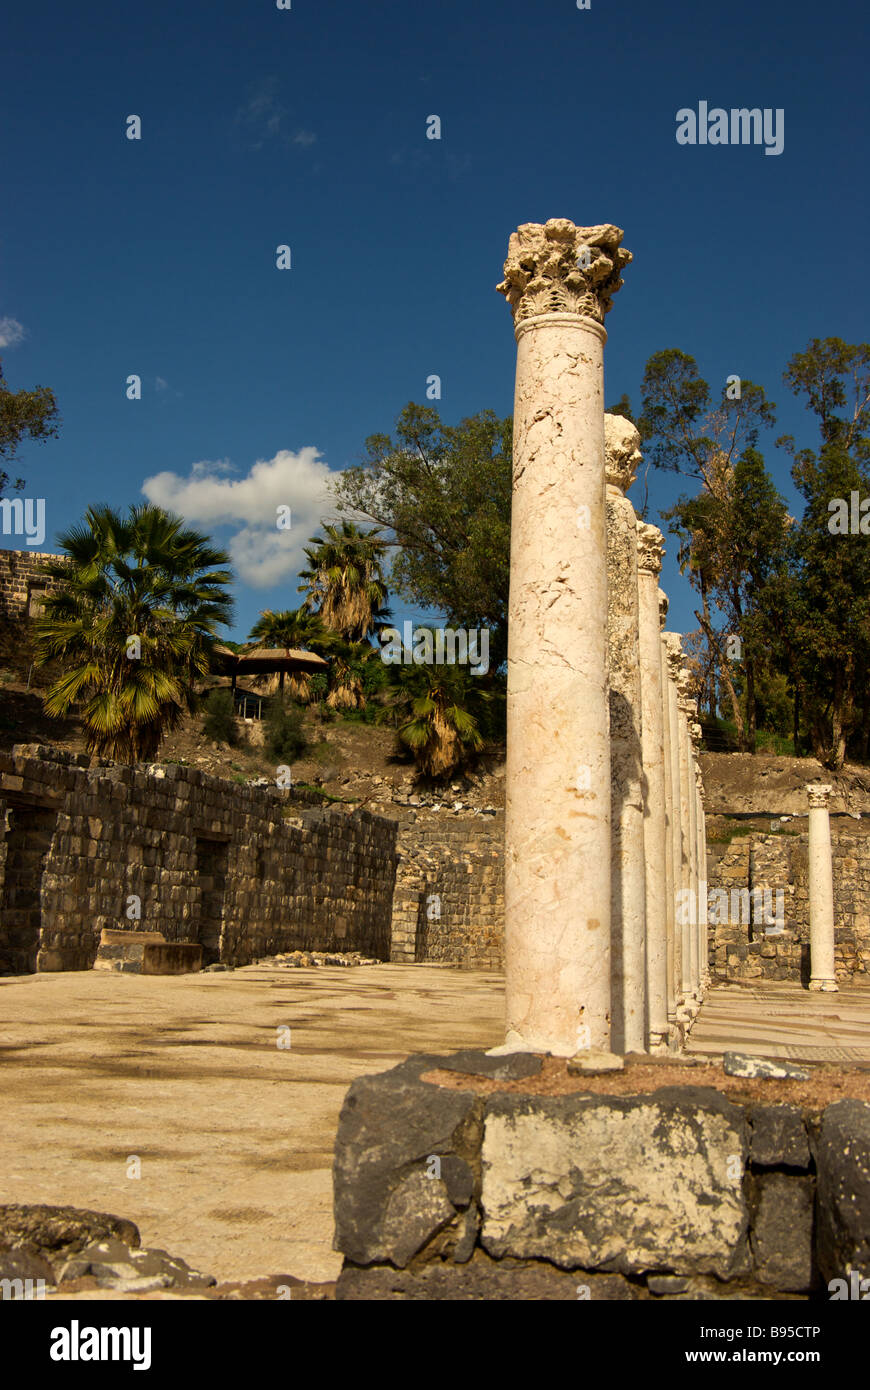 Marble support columns of a Byzantine bathhouse in ancient Scythopolis archaeological excavation site at Bet She an Stock Photo